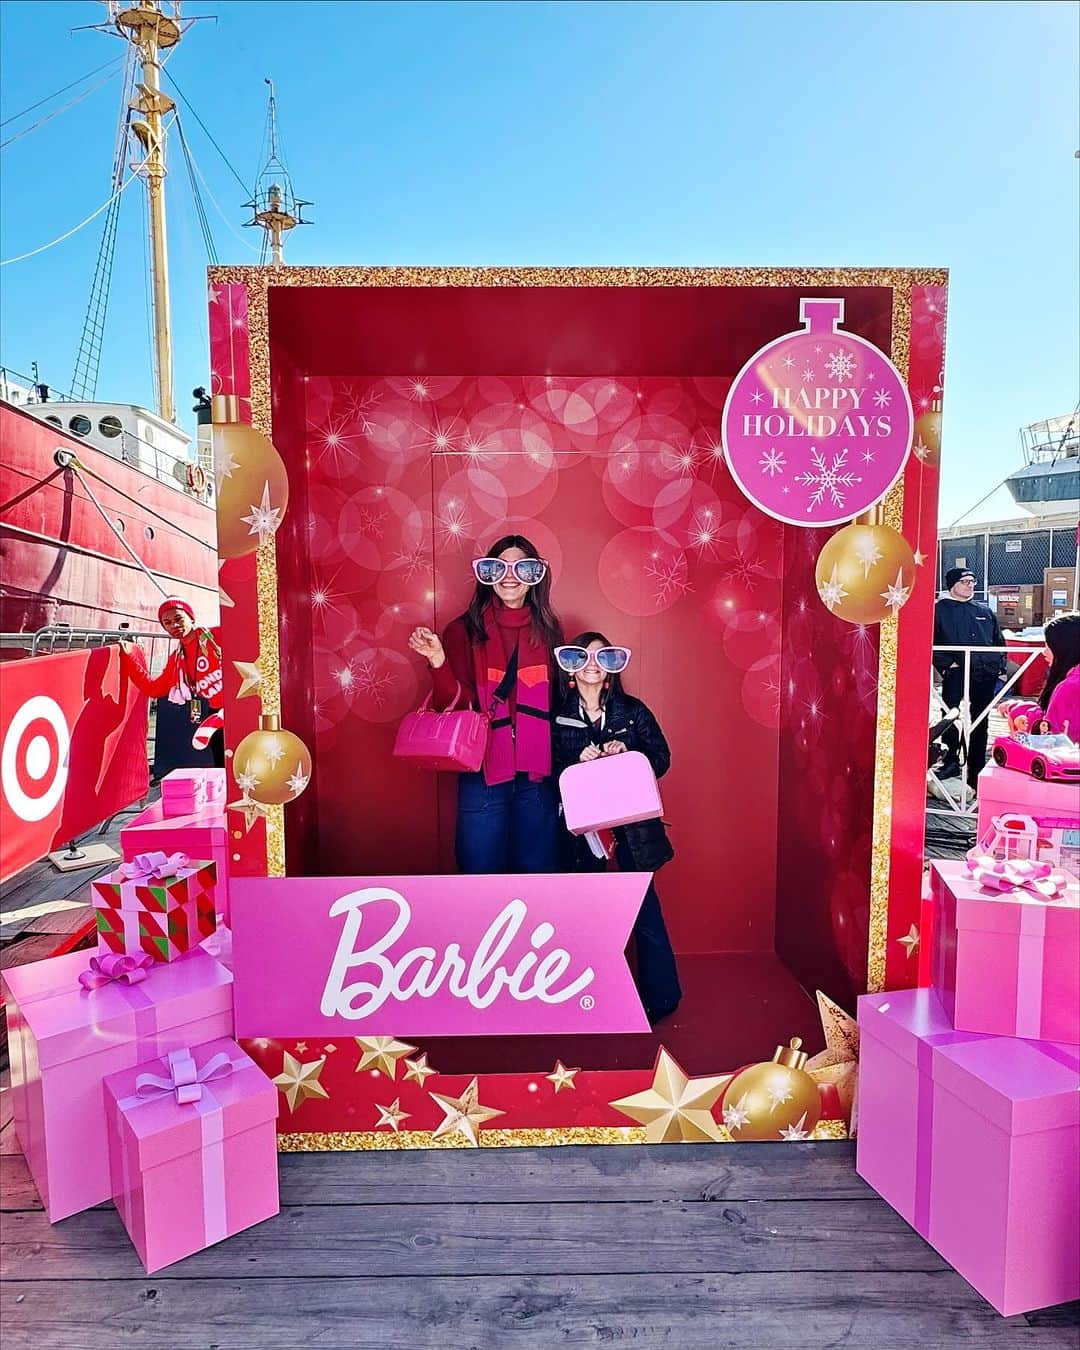 Ilana Wilesのインスタグラム：「We went to the @target Wonderland event this morning which is always such a fun way to kick off the holiday season! We posed in a giant Barbie box, played some Mario Kart outside on the pier, made LEGO snowflakes, explored a VR world, won holiday themed socks in the claw machine and checked out all the fun new toys that Target is featuring this holiday season. FYI, Harlow’s #1 pick is the toy Target register so she can play Target at home 😂 It’s open to the public until 7pm today at Pier 16 & 17 if you are in the area! If you can’t make it today, check out all of Target’s fun holiday things at the link in my bio!#TargetWonderland #TargetHoliday #TargetPartner」